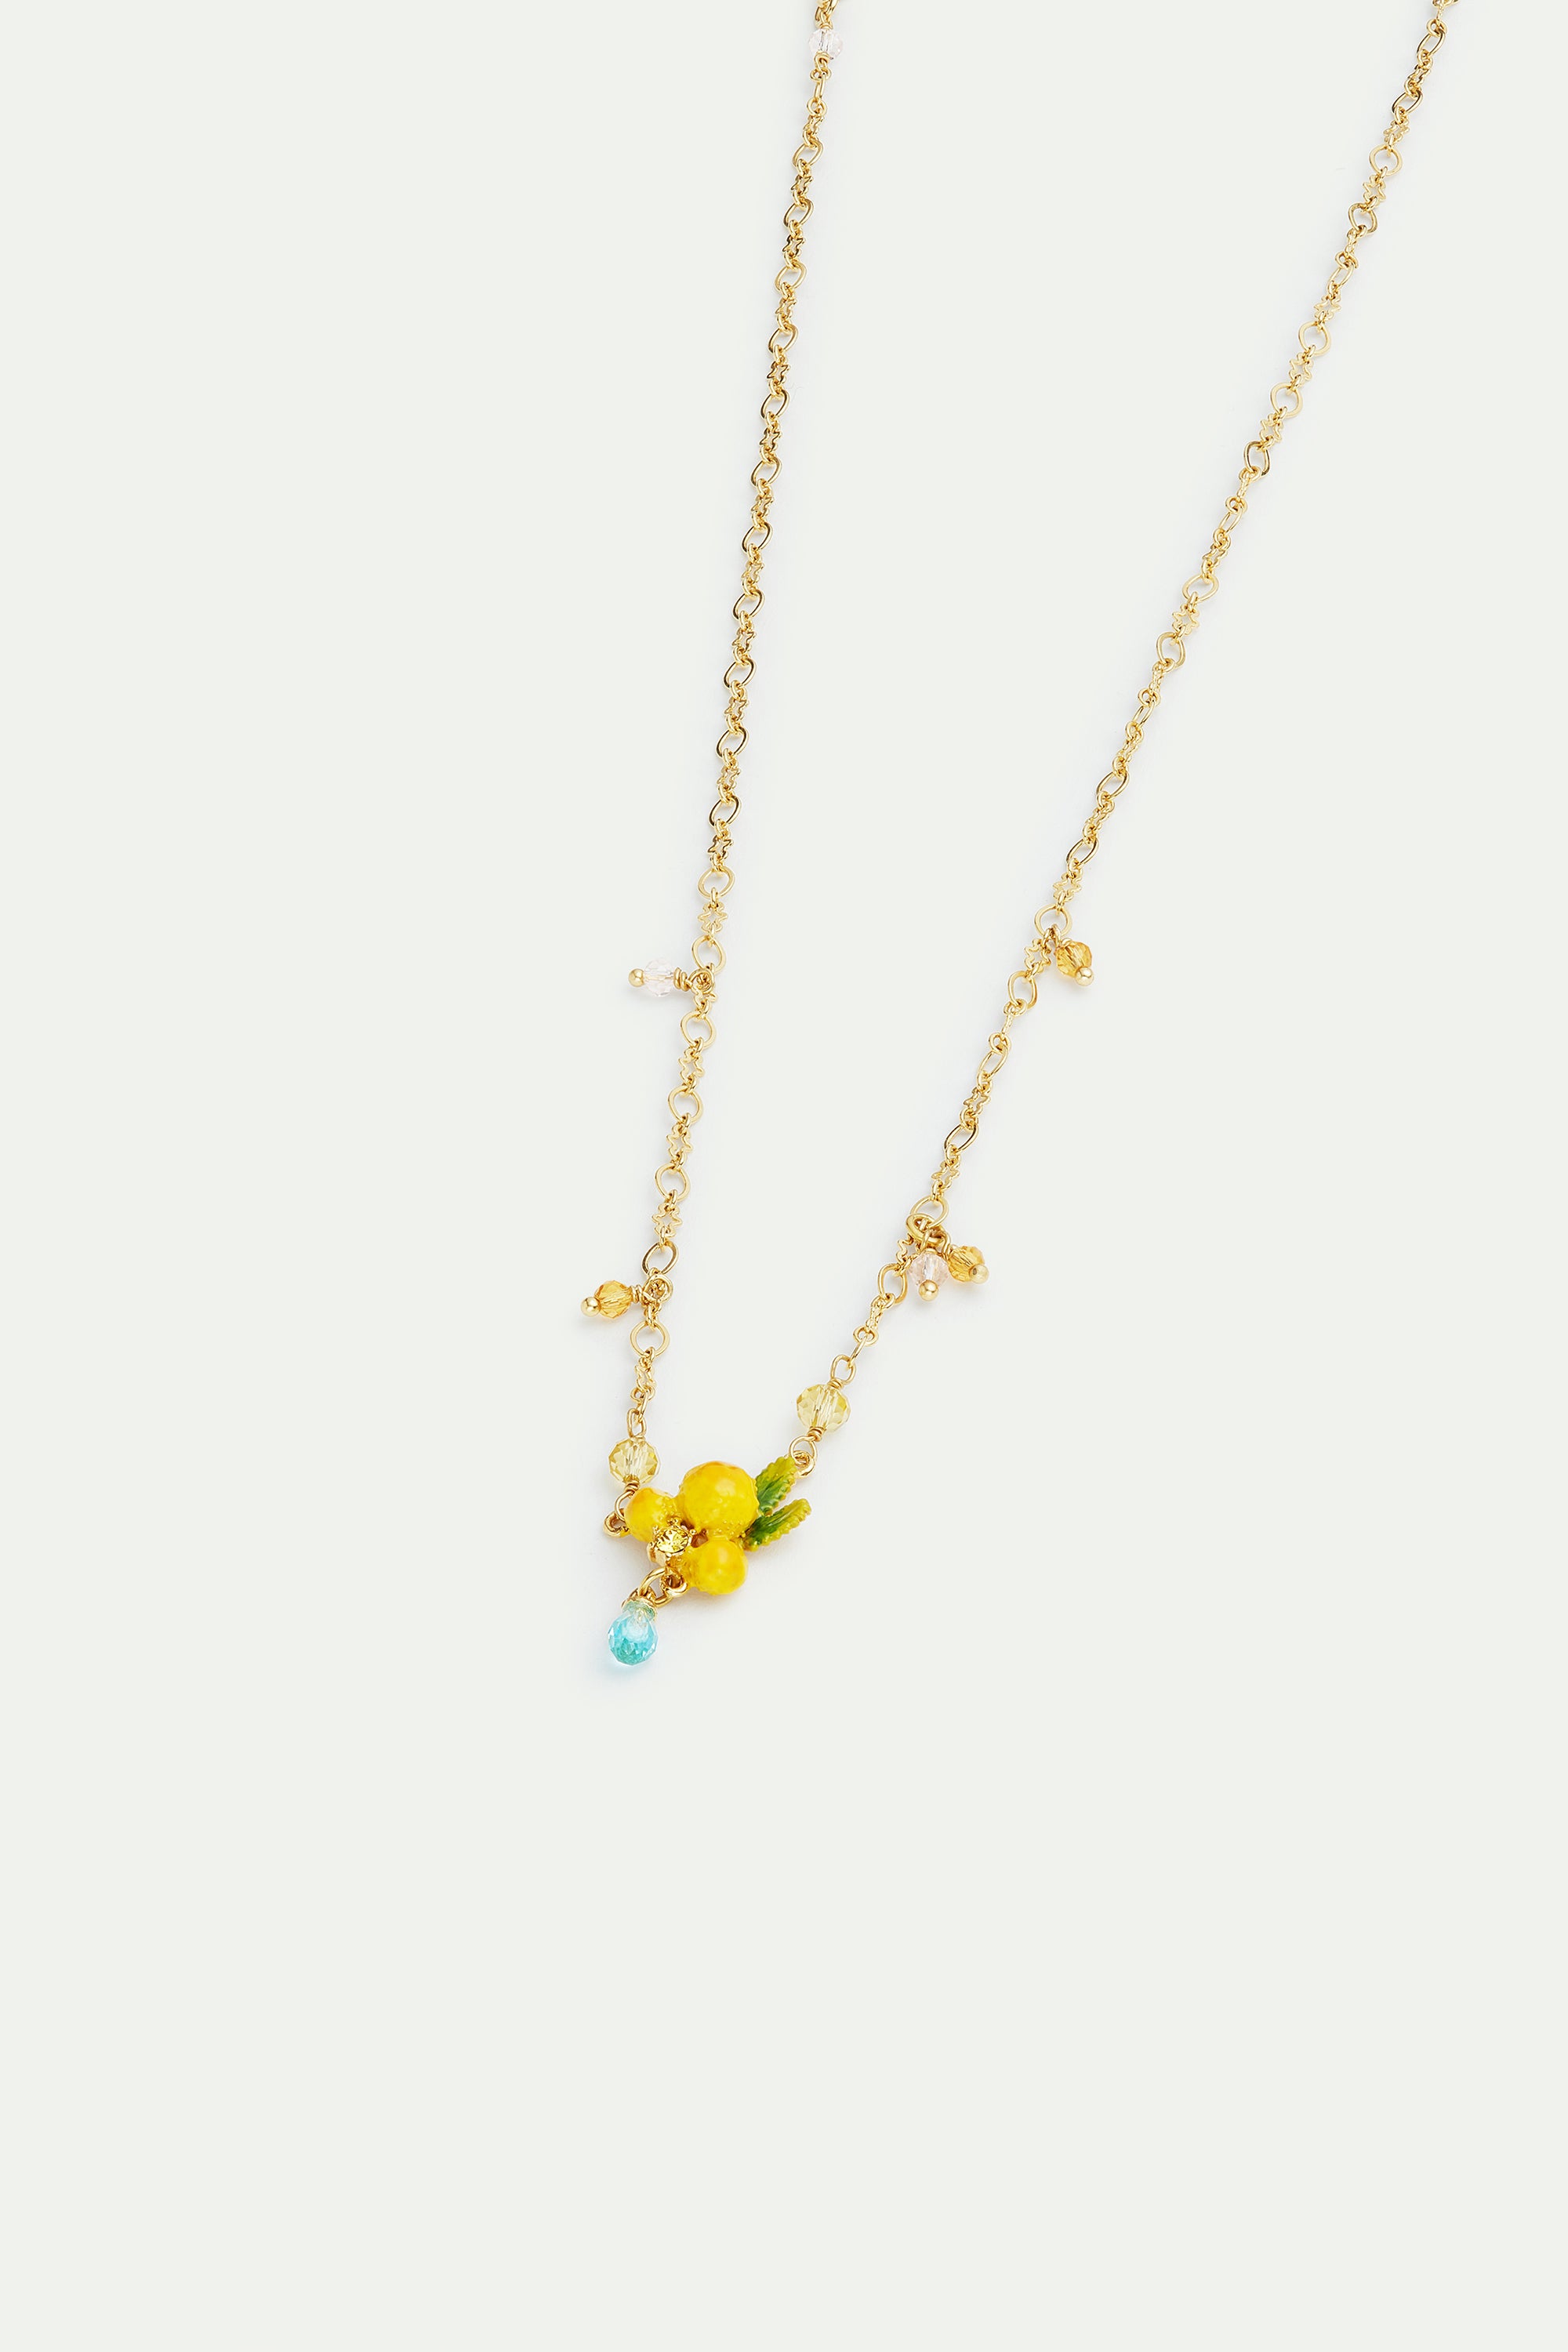 Mimosa flower and little pearls pendant necklace